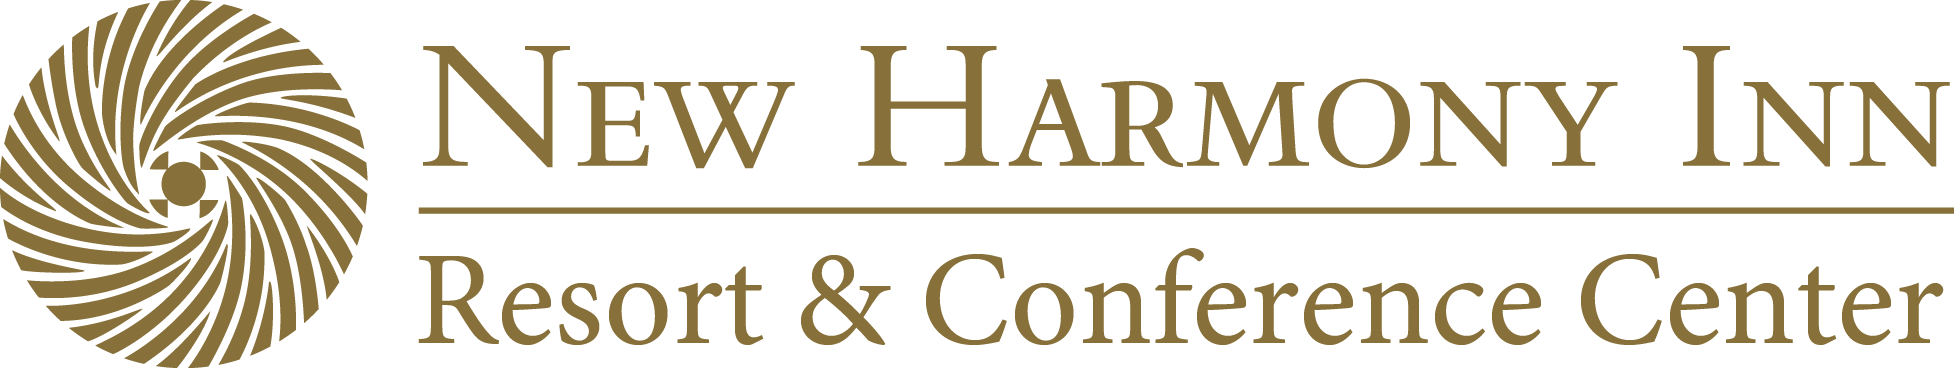 Logo for New Harmony Inn Resort and Conference Center